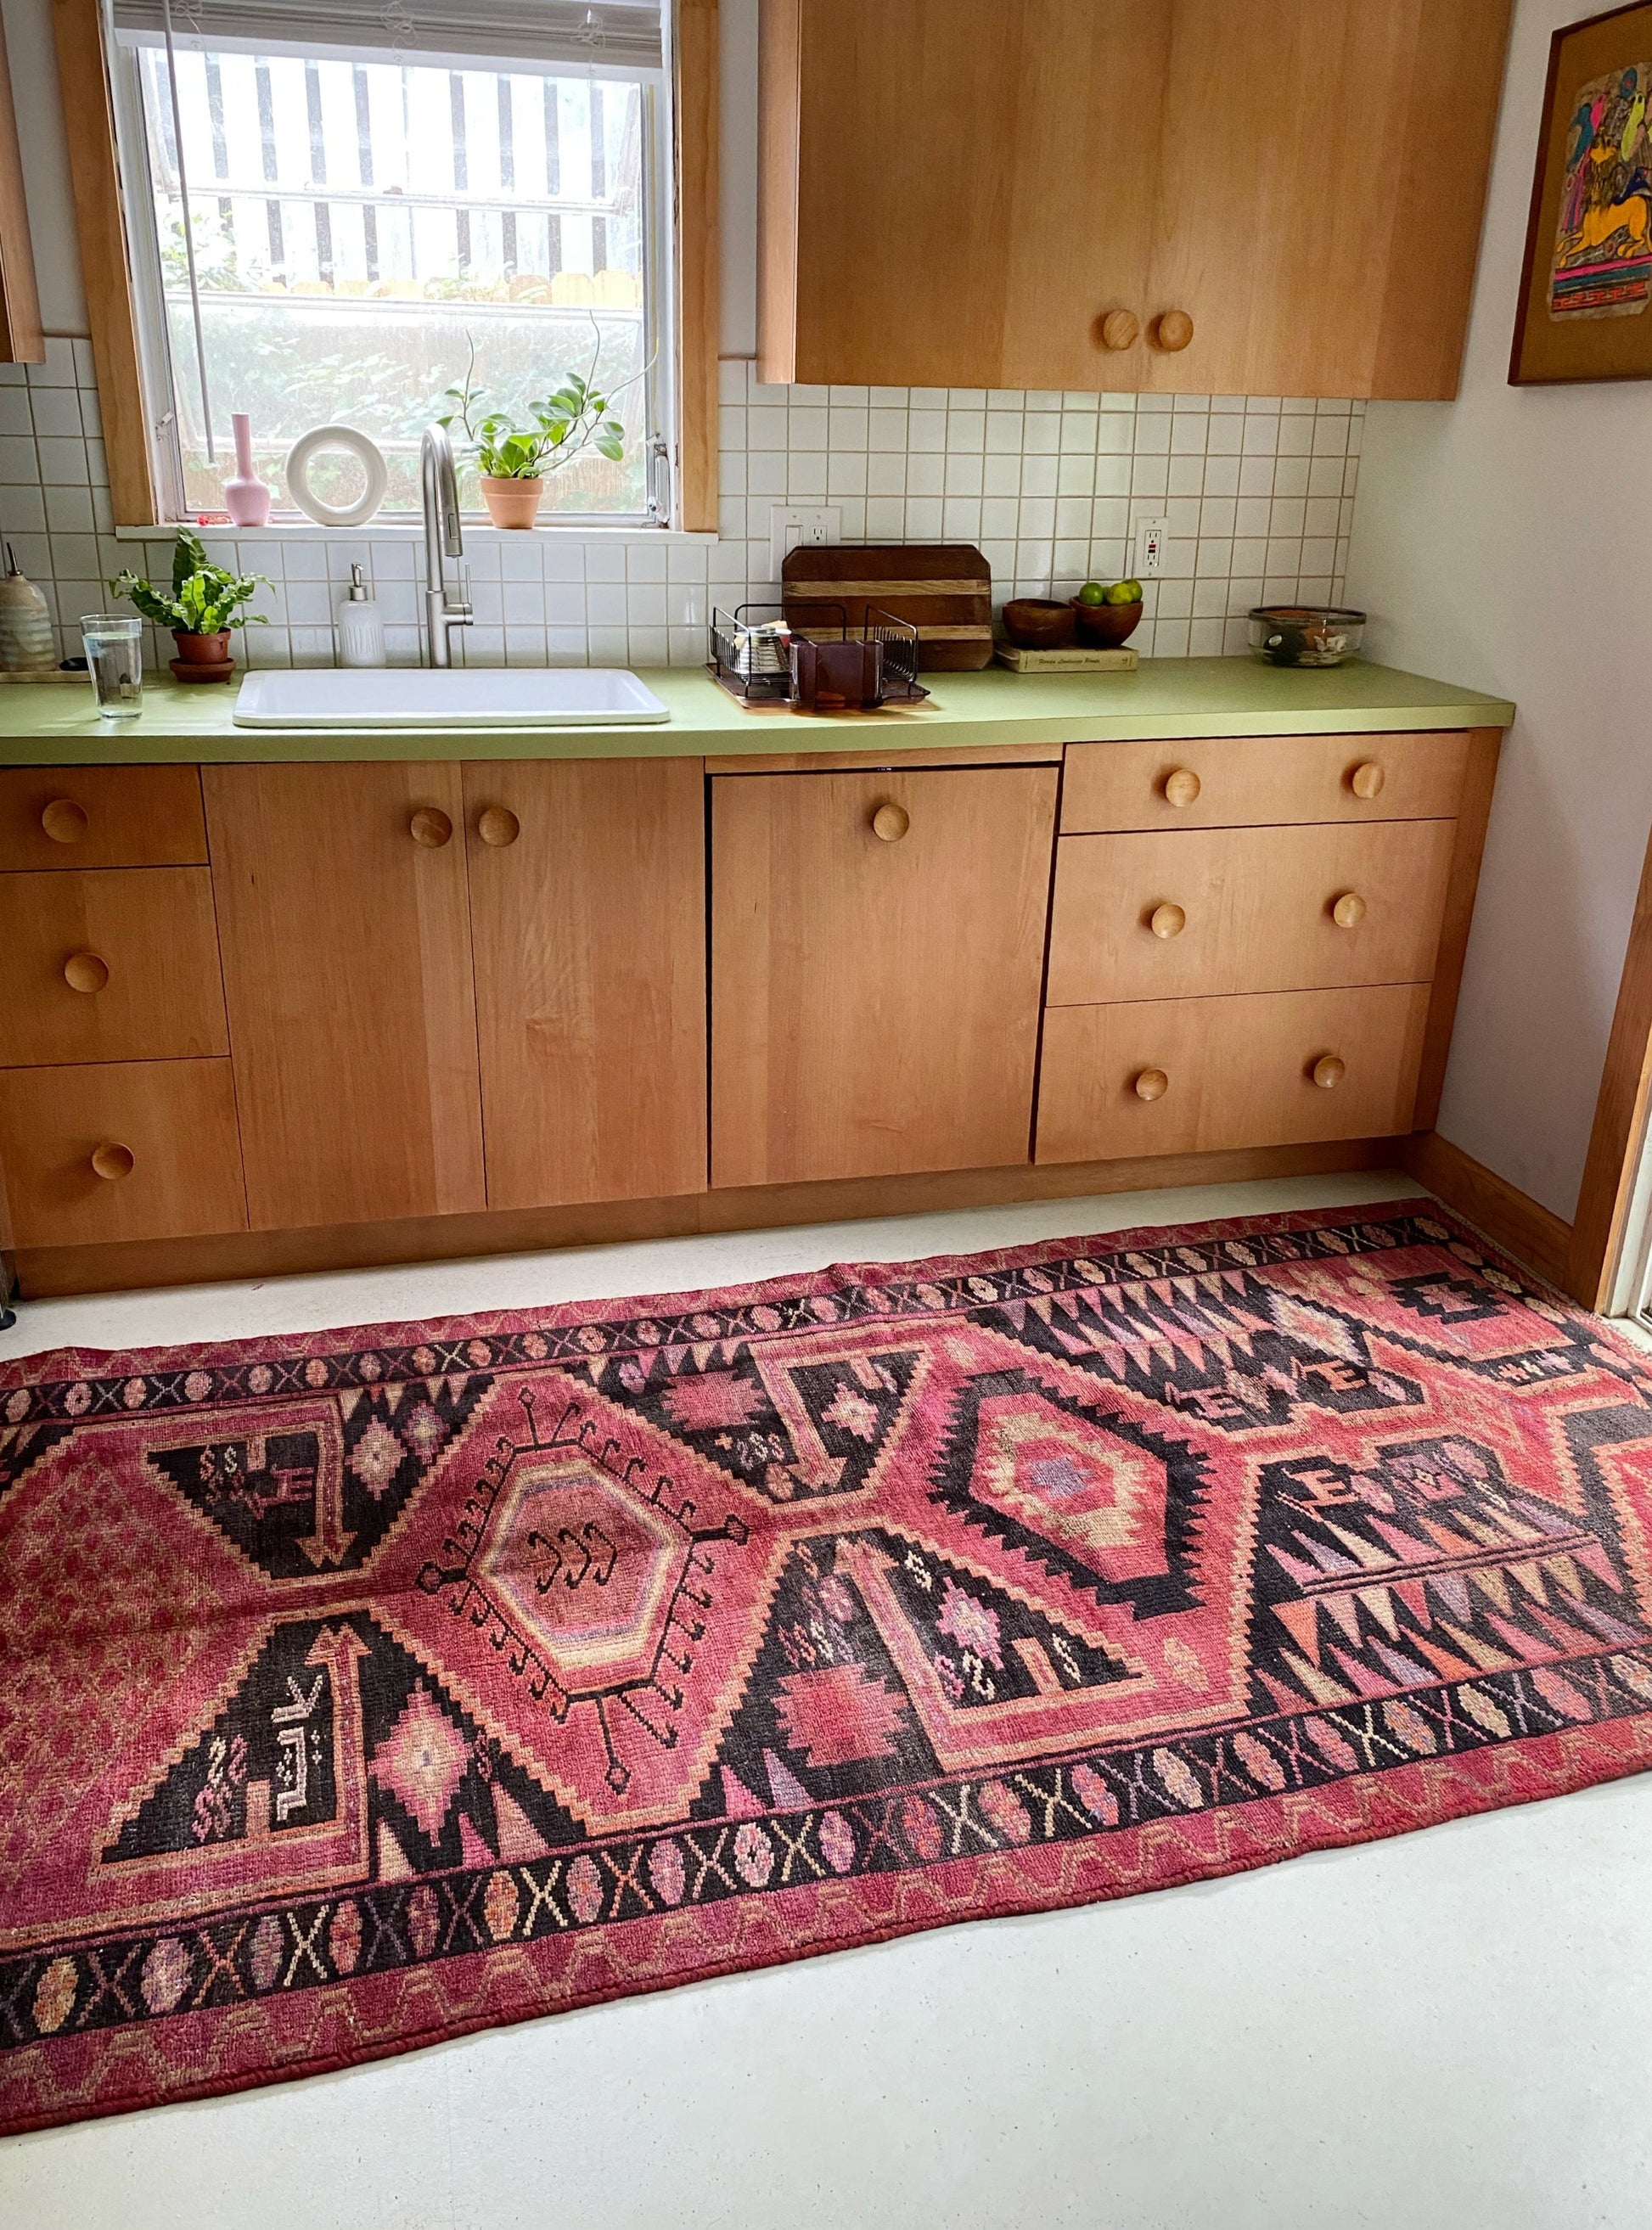 The kitchen is graced by a charming Persian rug, infusing the space with lively color accents